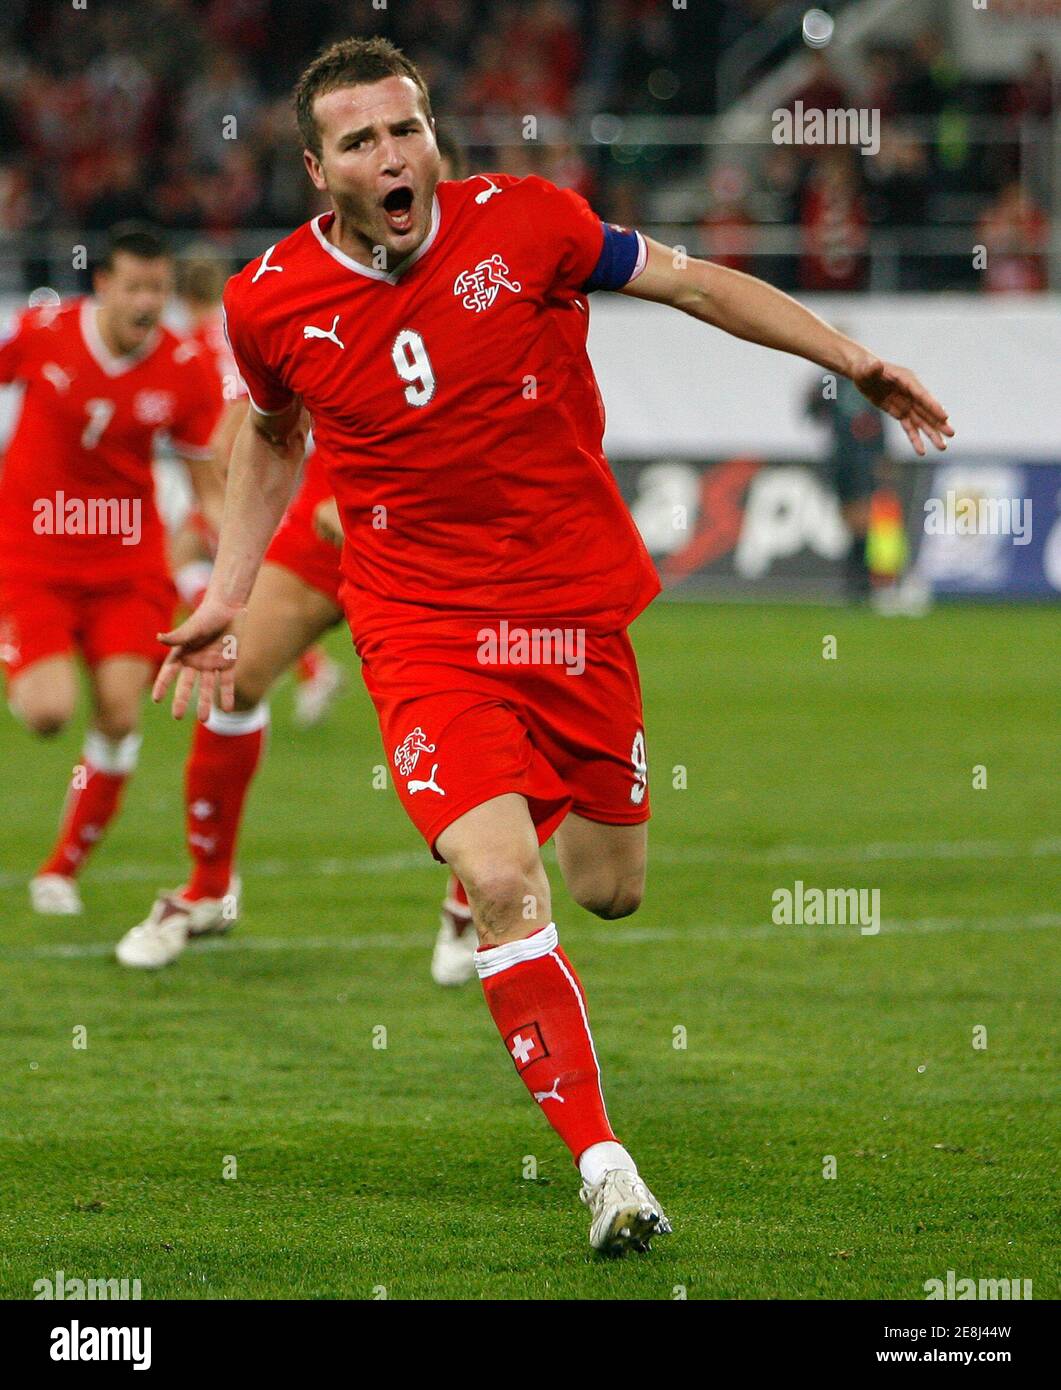 Switzerland's Alexander Frei celebrates after scoring during their 2010 World Cup qualifying soccer match against Latvia in St. Gallen October 11, 2008. Frei is his country's record scorer with 40 goals in 73 games and, with only two of the other probable squad members having reached double figures, his country's hopes of goals will be placed largely on his back. Picture taken October 11, 2008. To match Feature SOCCER-WORLD/SWITZERLAND-FREI     REUTERS/Miro Kuzmanovic (SWITZERLAND - Tags: SPORT SOCCER WORLD CUP) Stock Photo